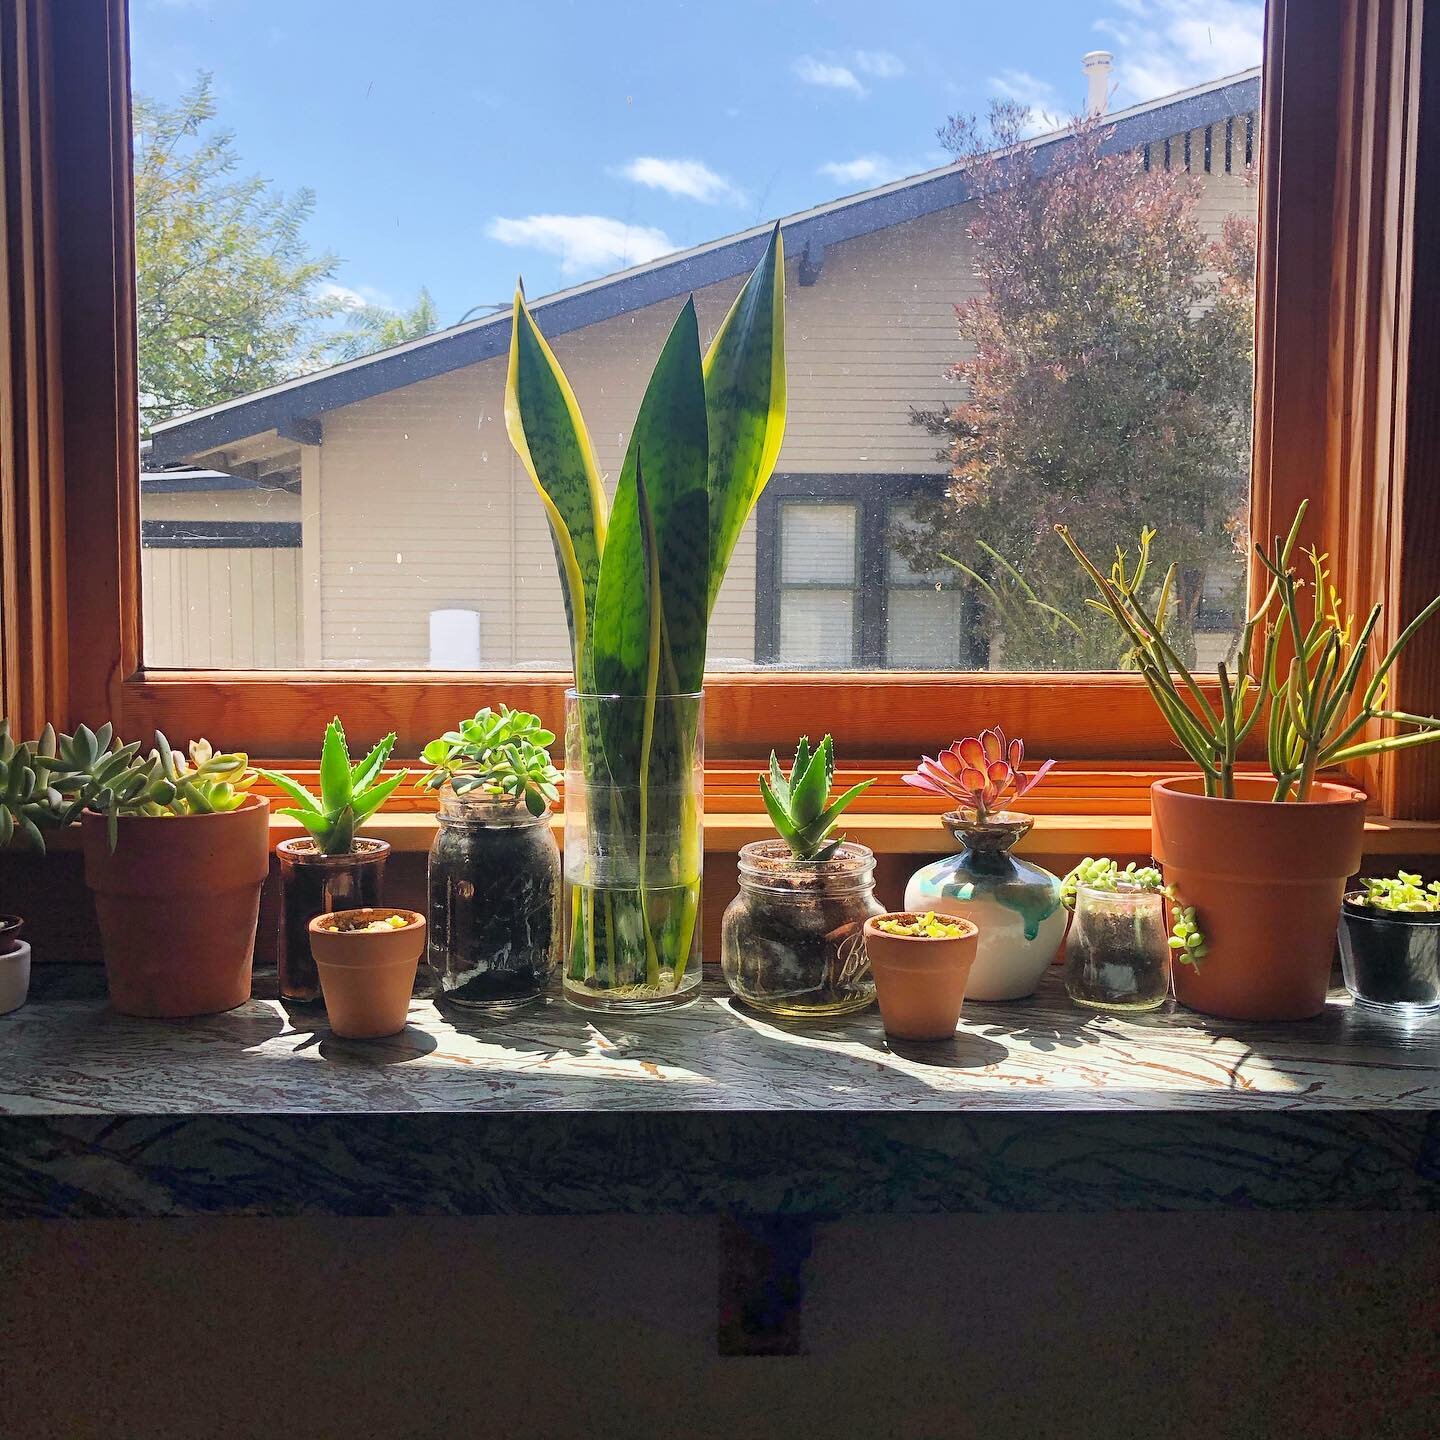 👋🏽 just a hello to say i still exist. feeling grateful for my little makeshift greenhouse window and to watch all these plant babies propagating. i hope everyone is staying home/safe/sane. a + b will be back at it at some point!